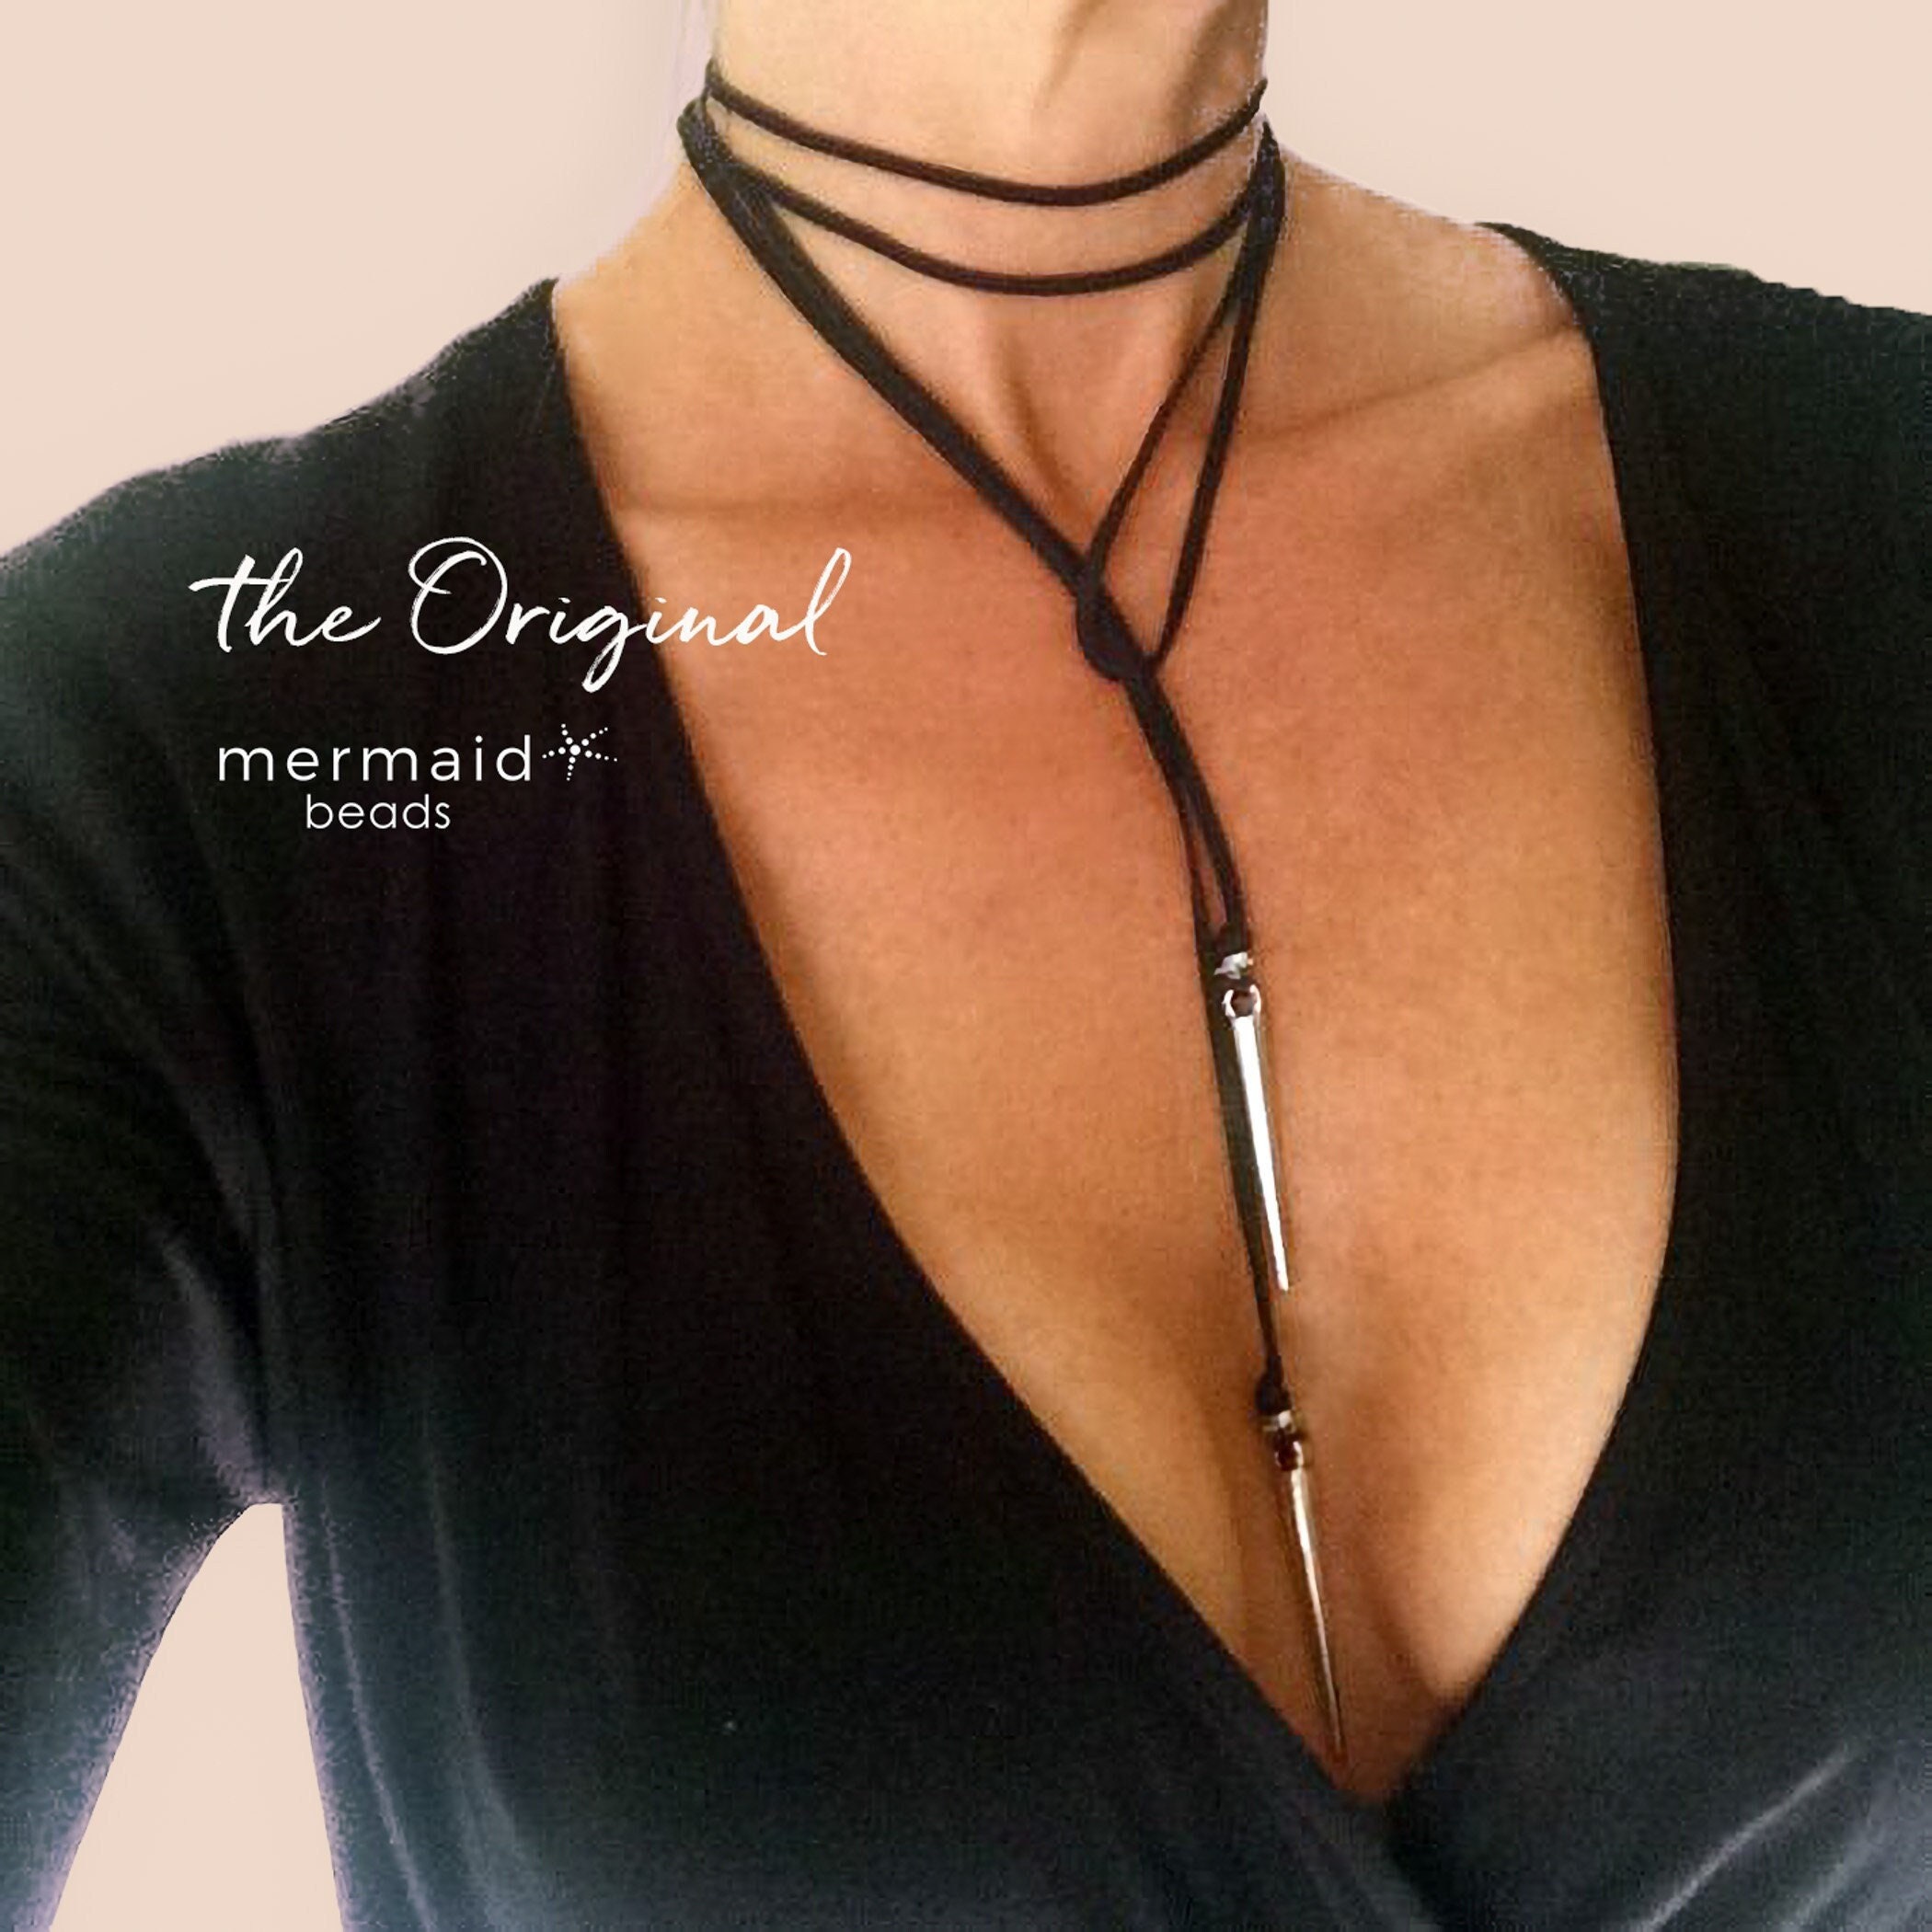 Waterproof Necklace,black Braided Cord Necklace, Mens Black Choker,  Necklace for Pendant, Surfer Choker, Custom Sized Choker, Hypoallergenic 